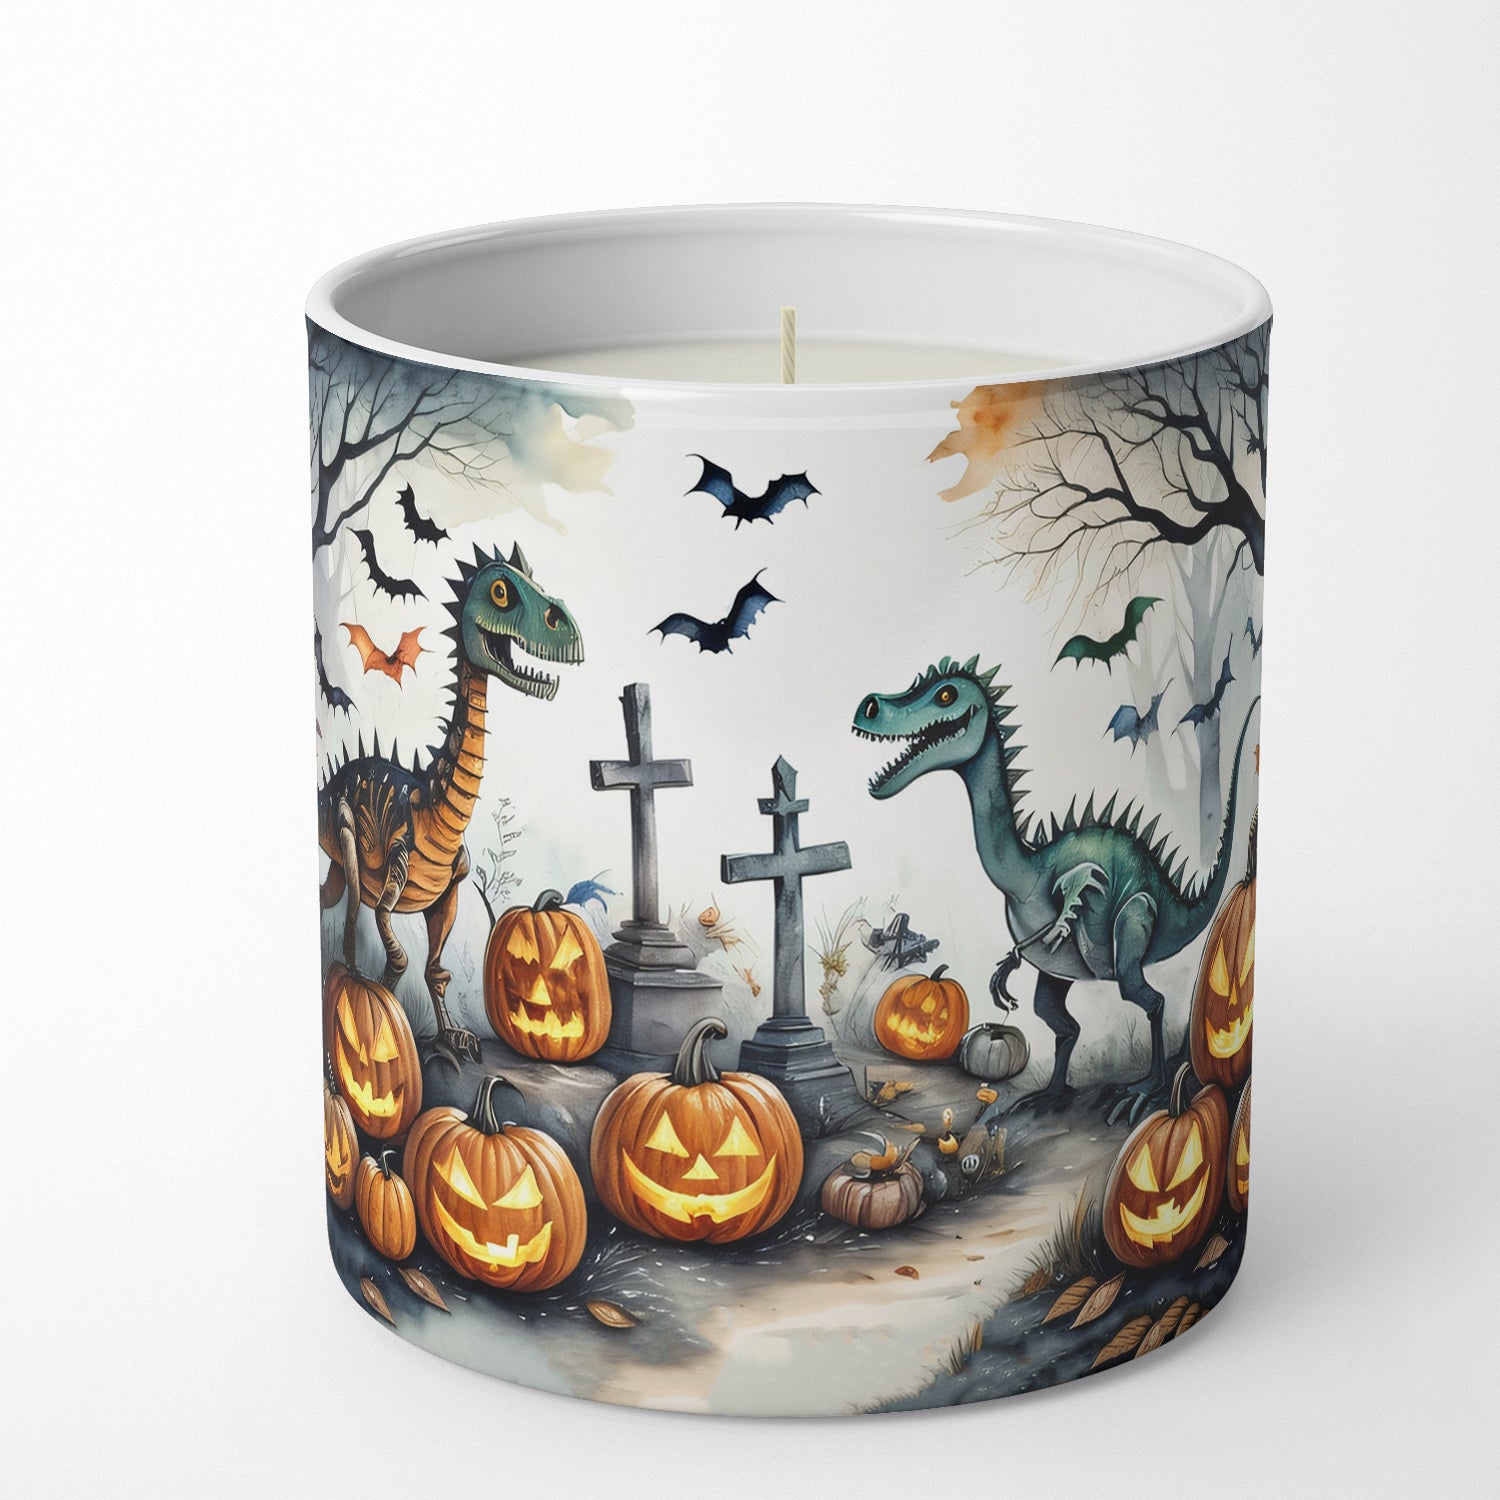 Dinosaurs Spooky Halloween Decorative Soy Candle